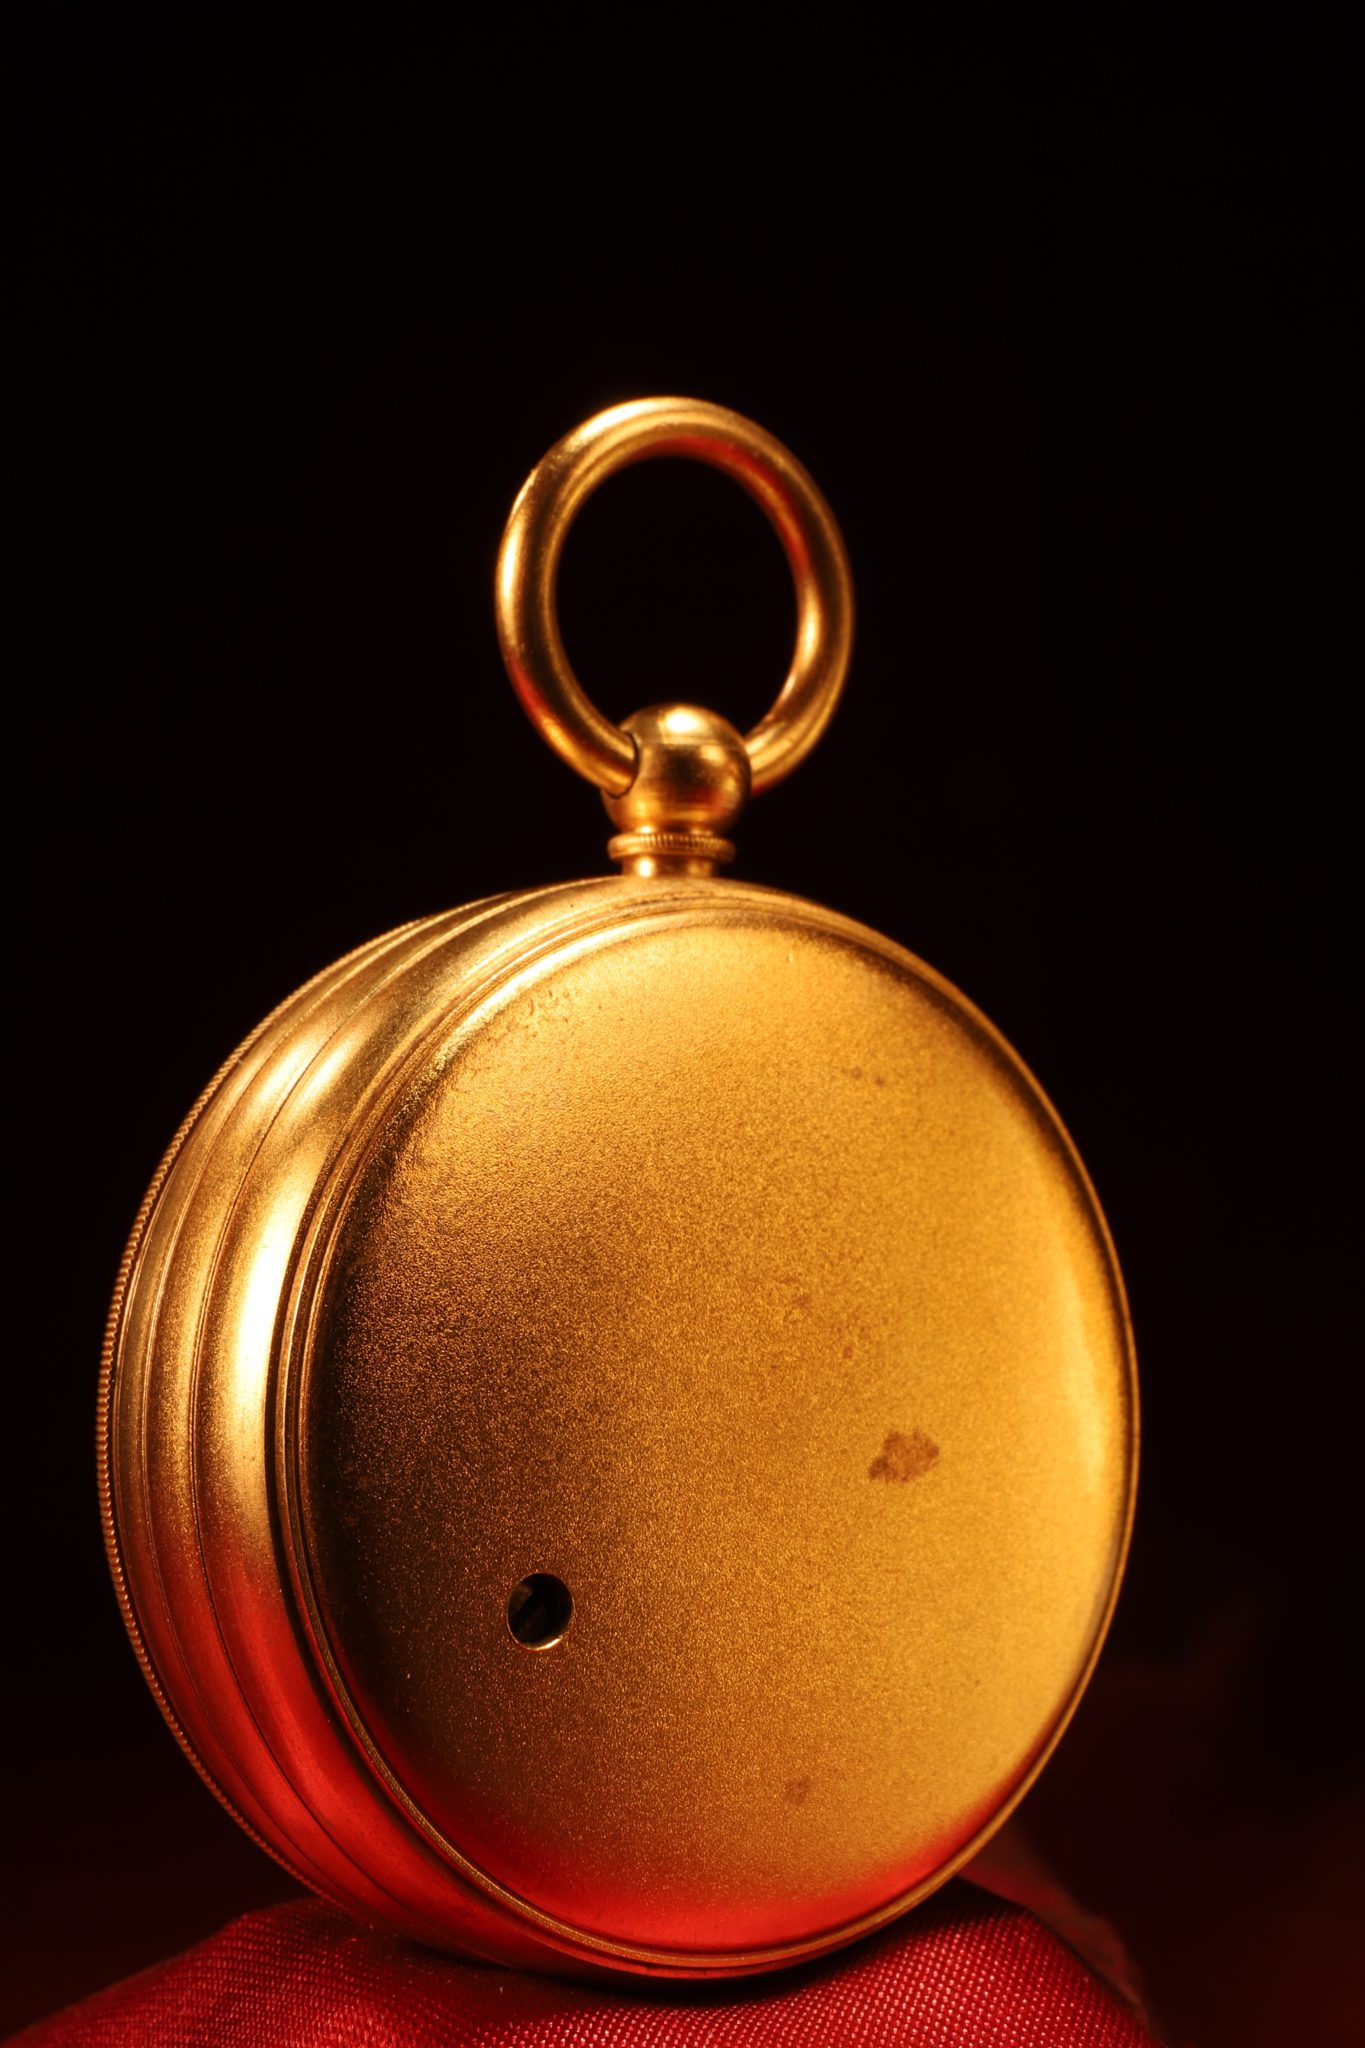 Image of Pocket Barometer by Armstrong No 263